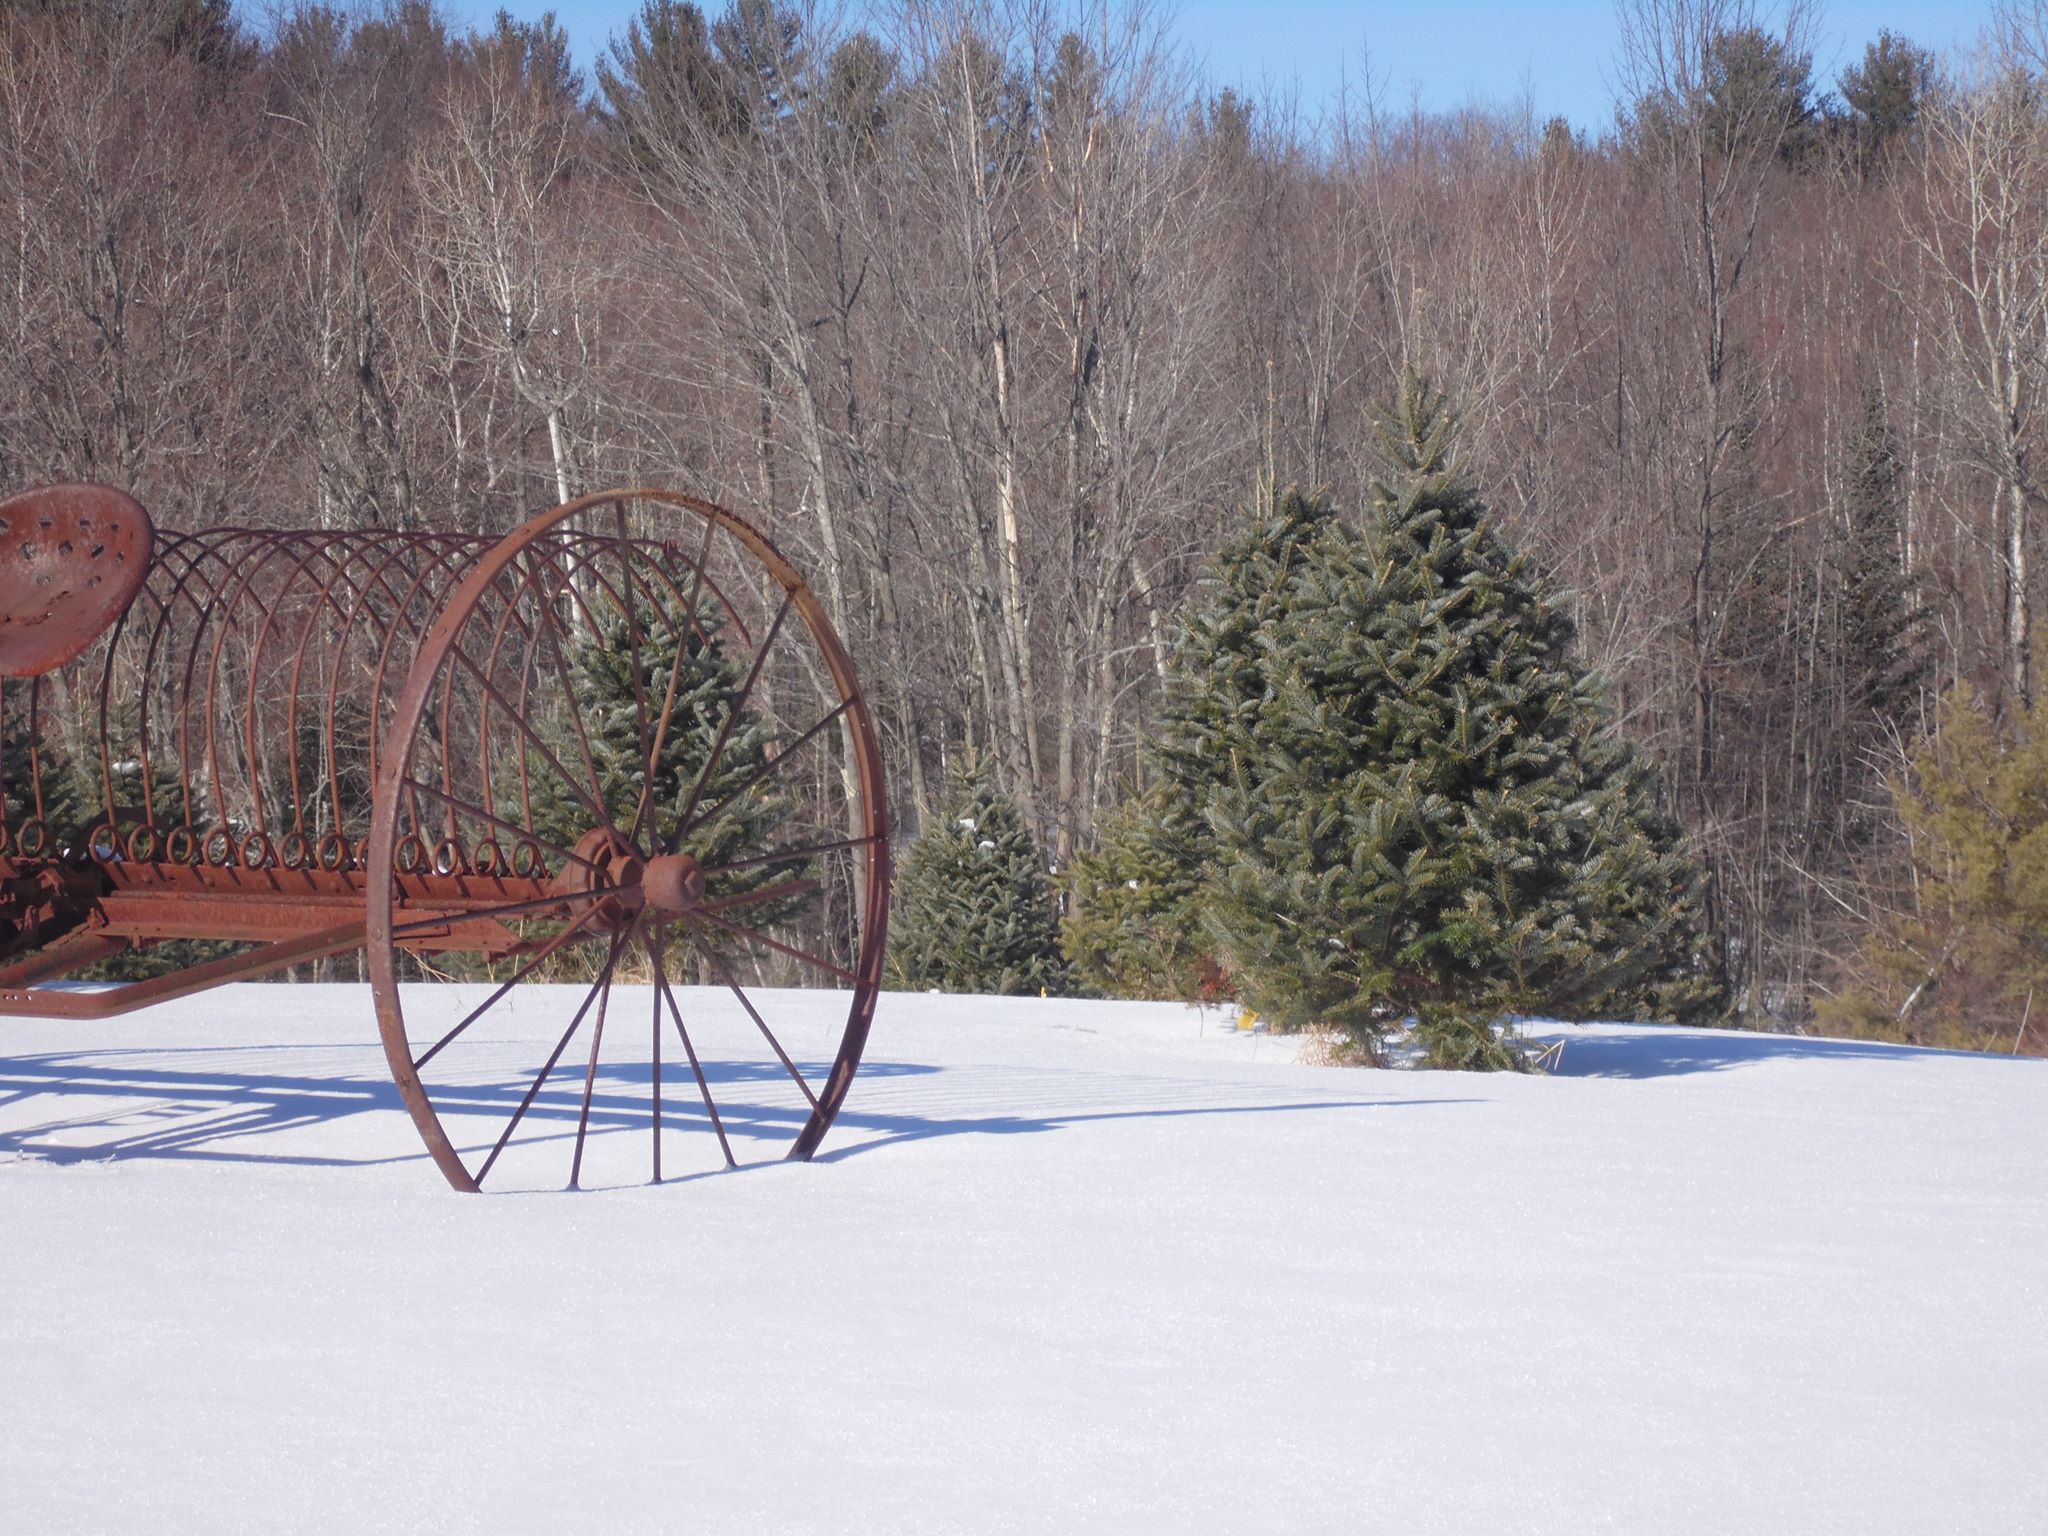 A farm implement sitting on a snowy hill